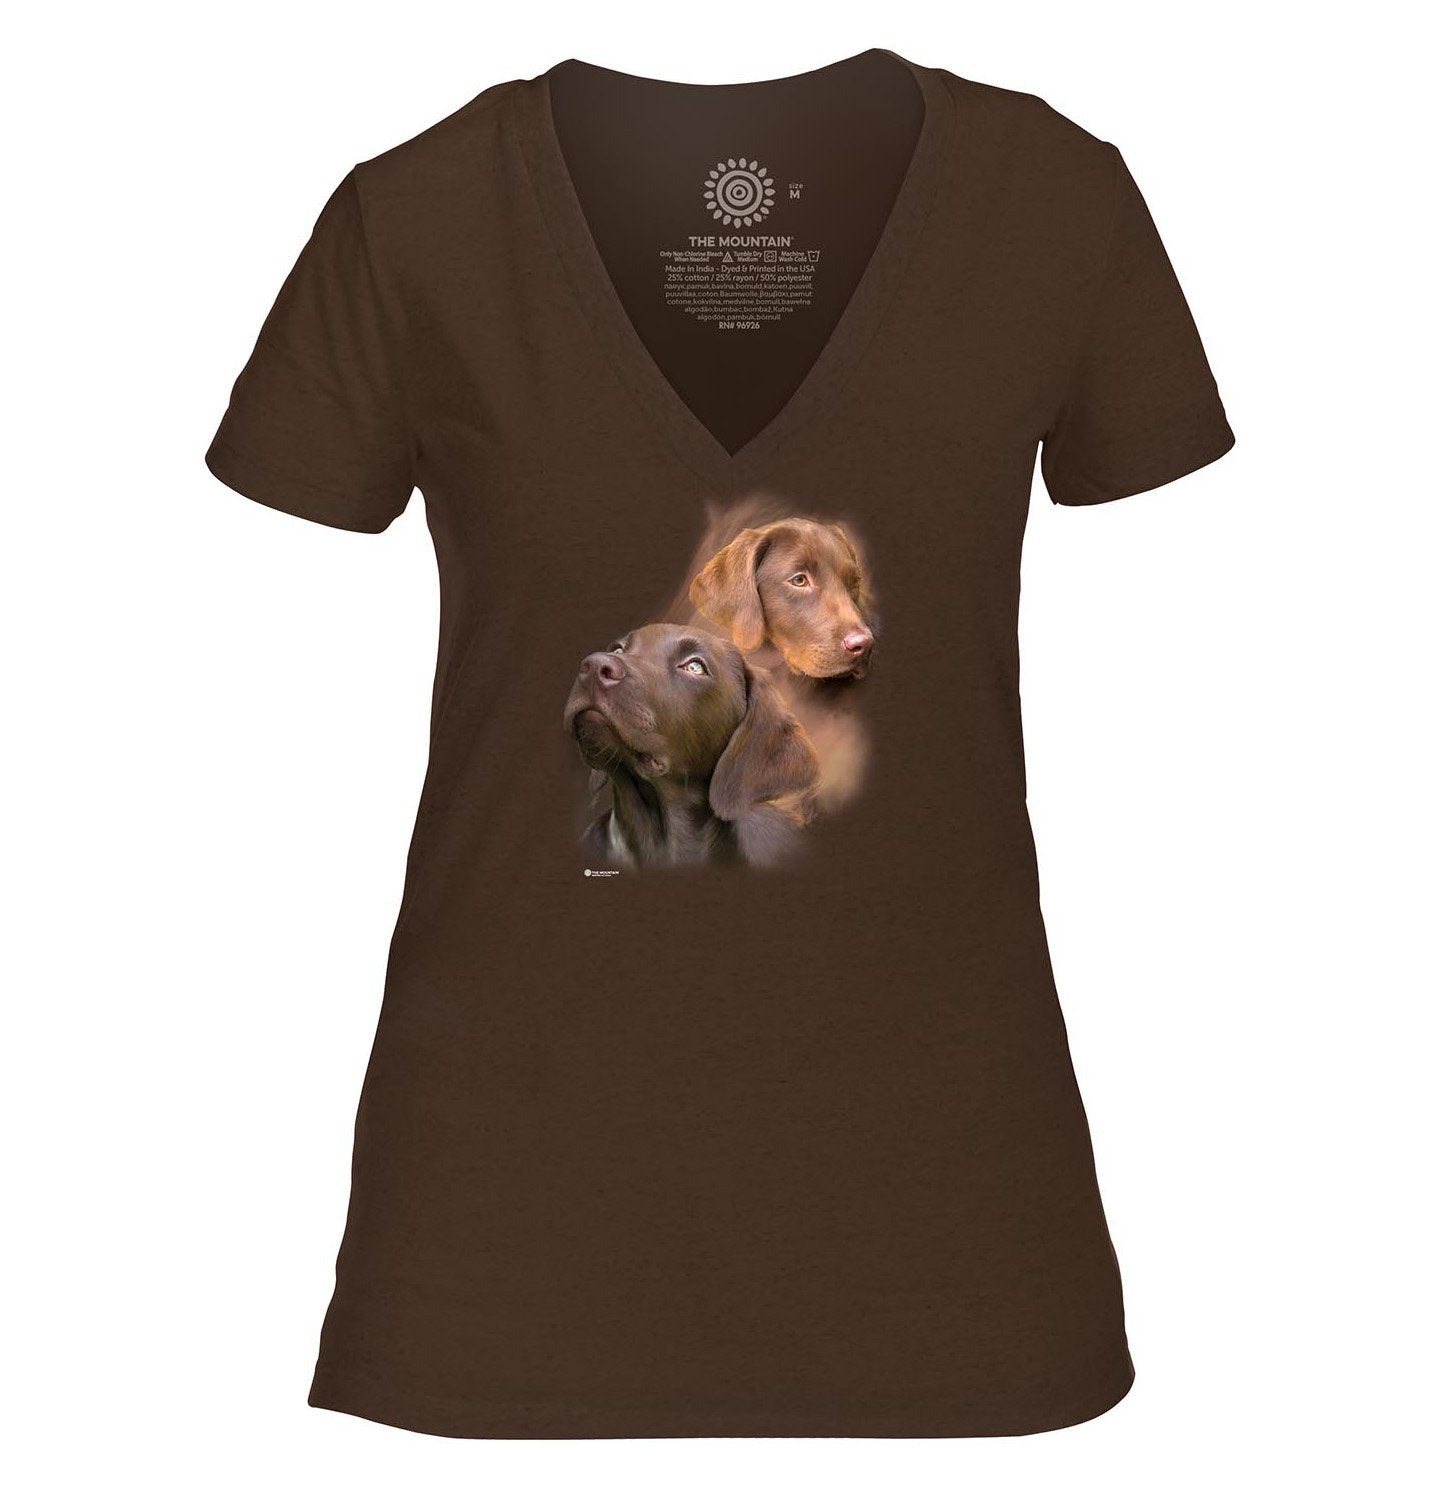 The Mountain - Chocolate Labs - Women's Tri-Blend V-Neck T-Shirt